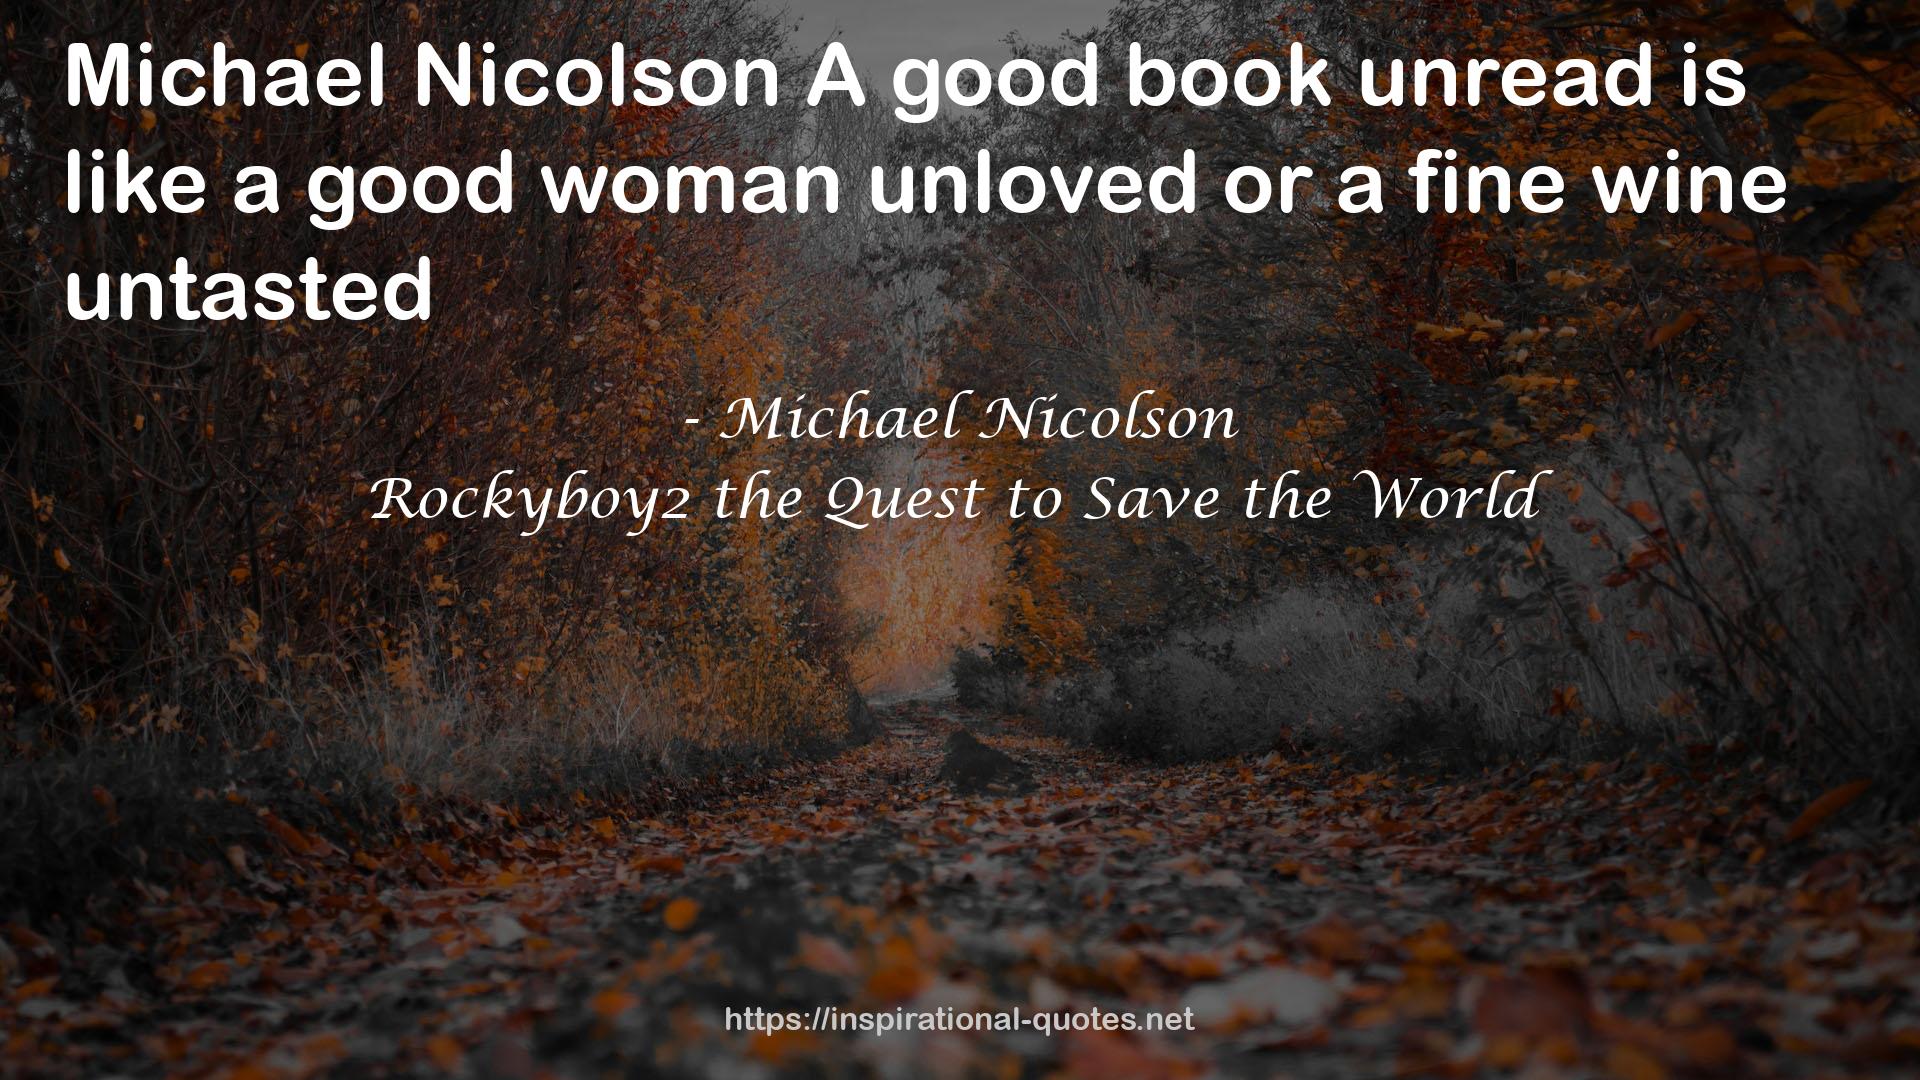 Rockyboy2 the Quest to Save the World QUOTES